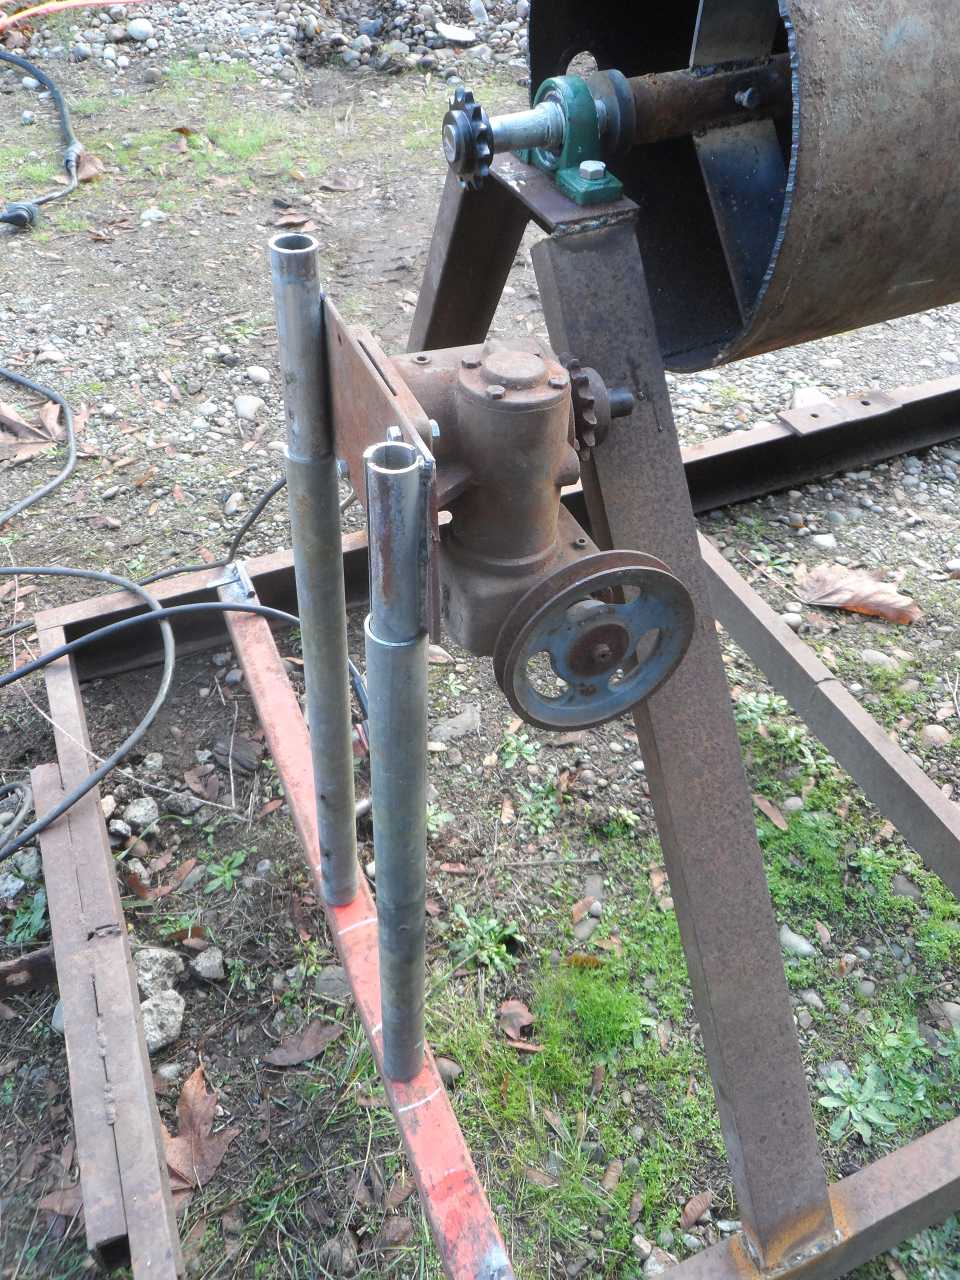 Gearbox and slide waiting to be welded